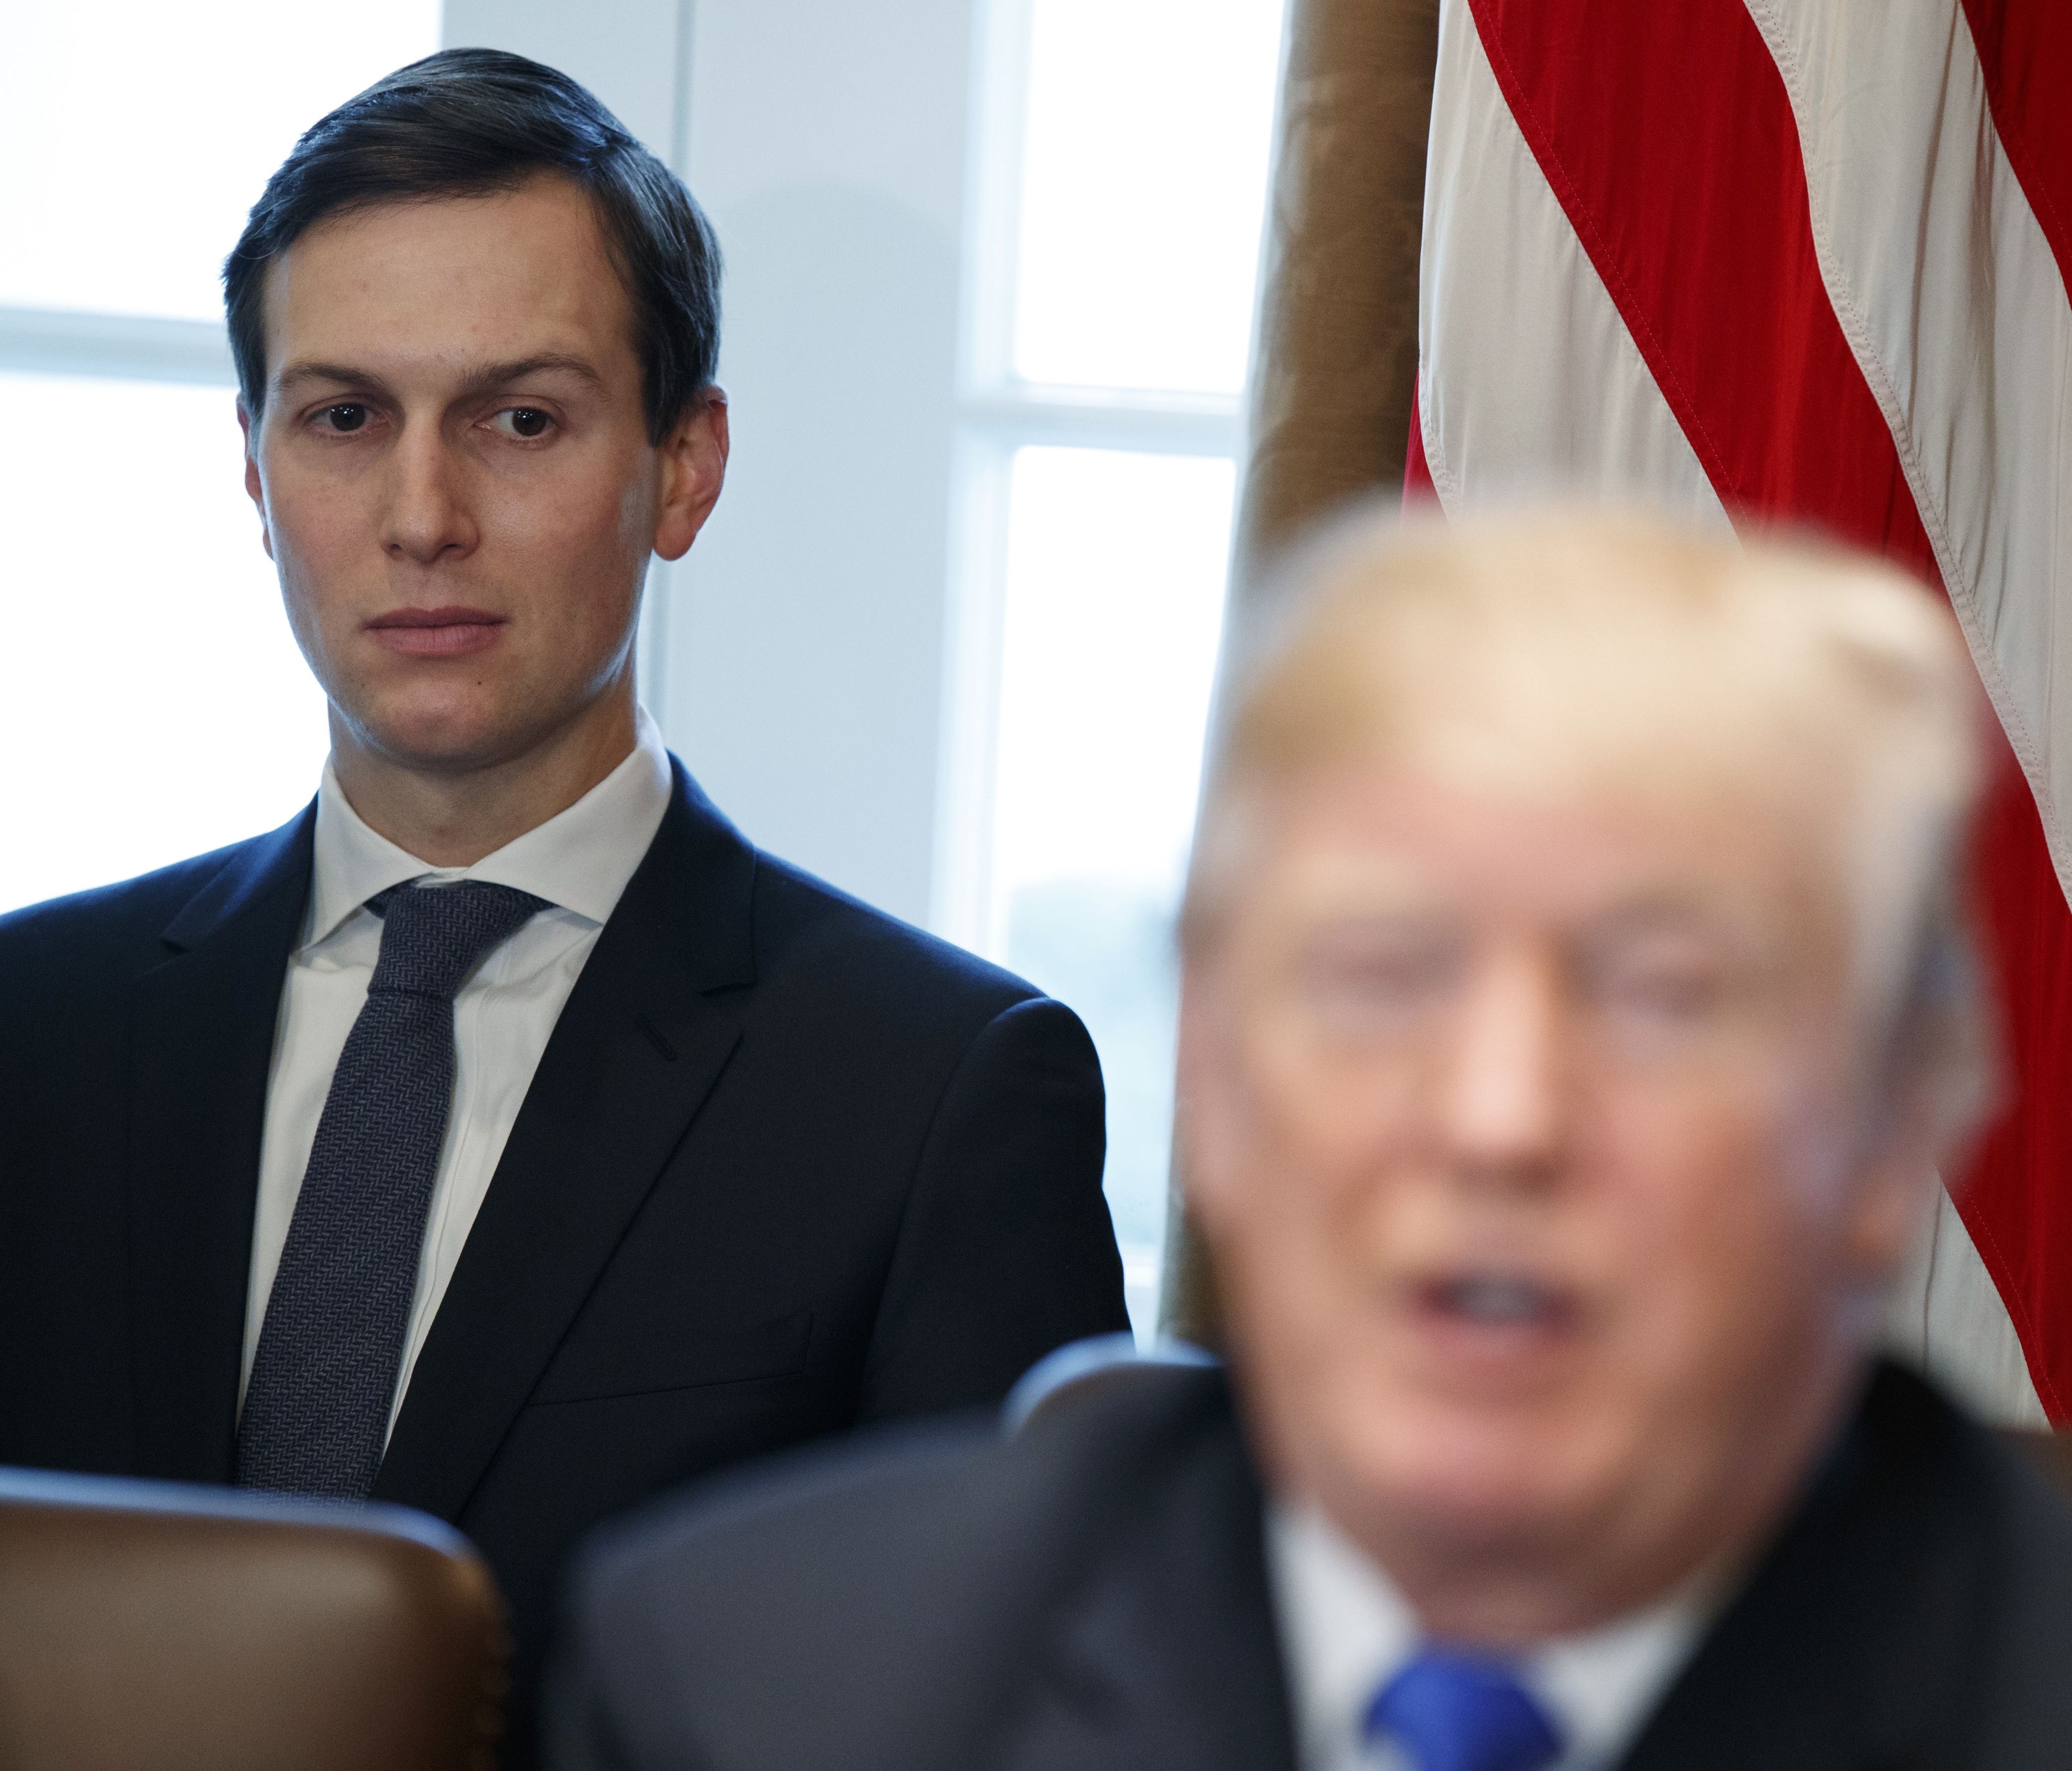 In as Dec. 20, 2017 file photo, White House senior adviser Jared Kushner listens as President Trump speaks during a cabinet meeting at the White House in Washington.